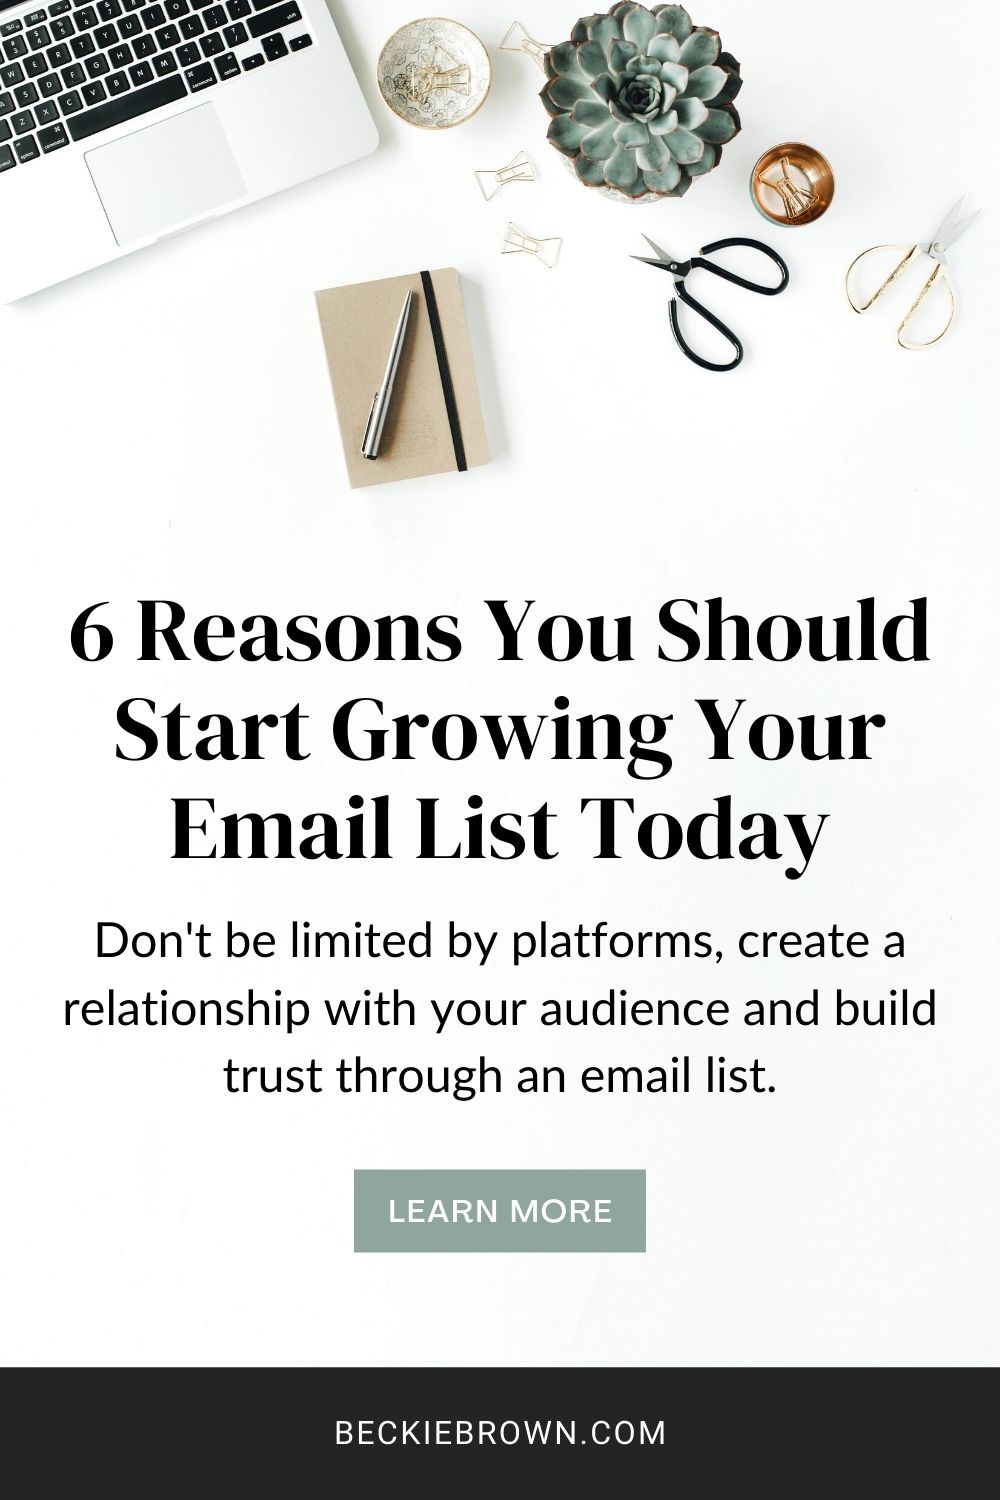 Don't be limited by platforms, create a relationship with your audience and build trust through an email list.